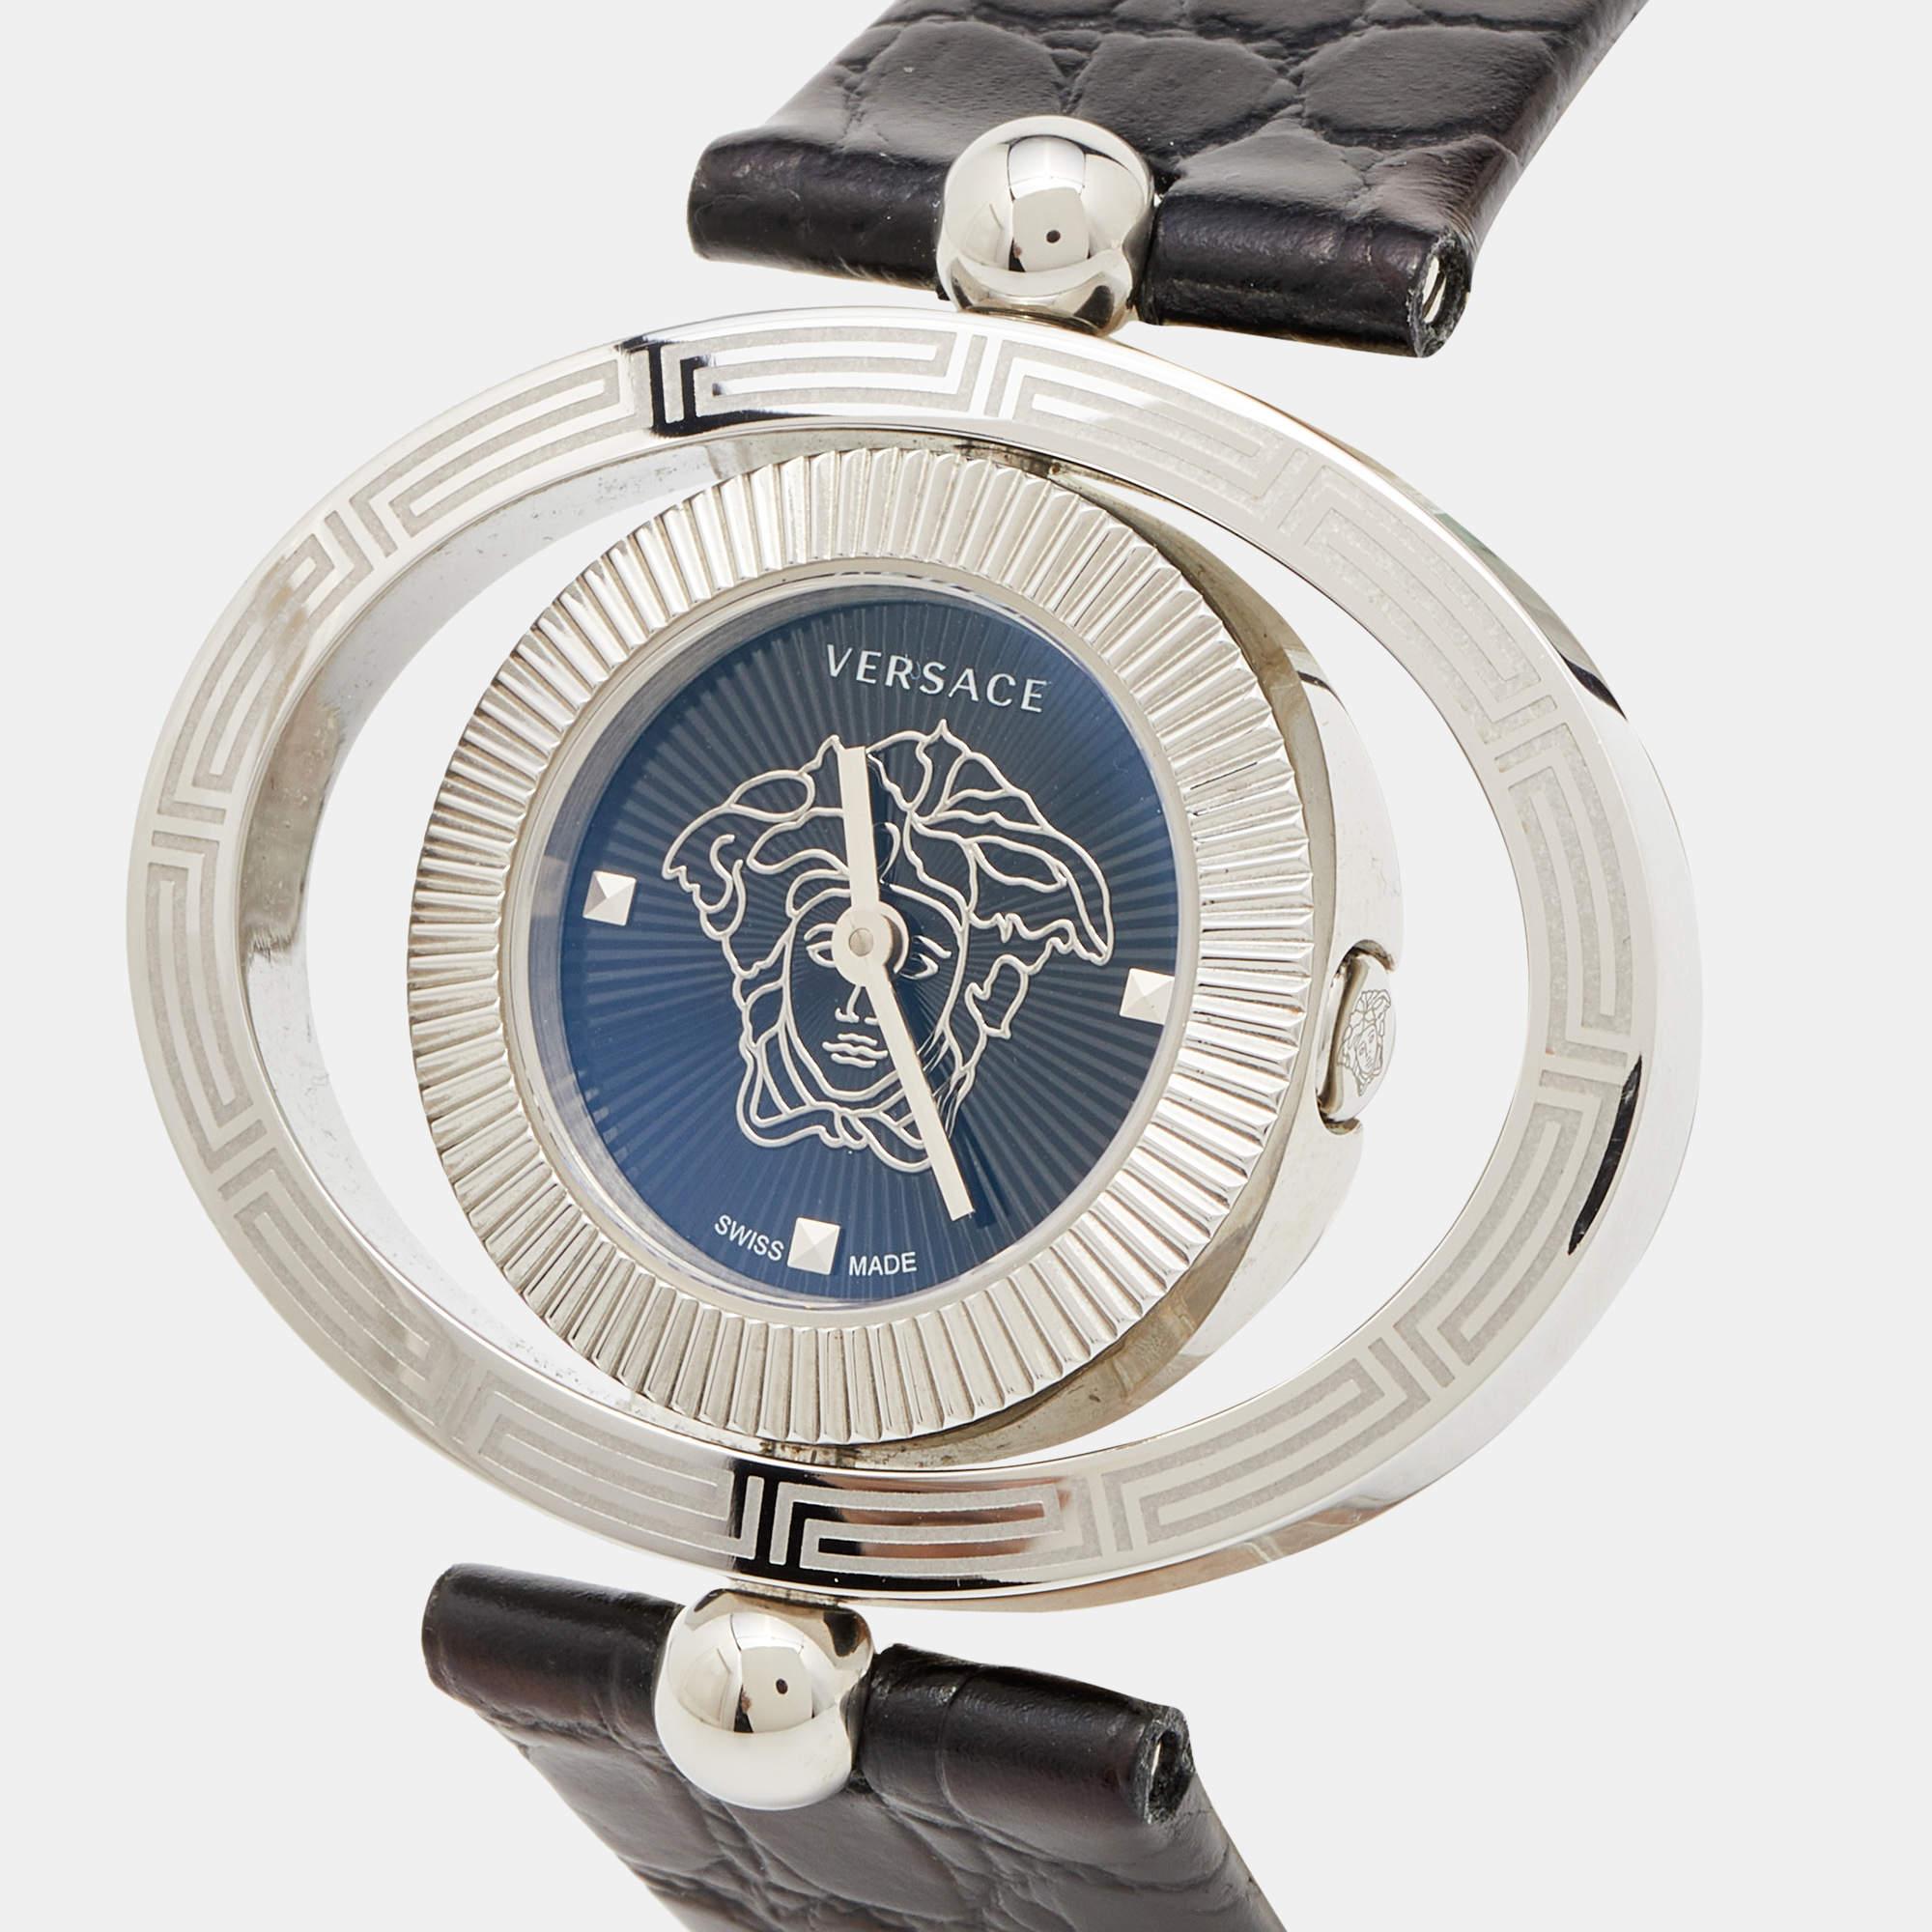 Flaunt your elegant style with this luxe wristwatch from Versace. This Eon wristwatch, created from stainless steel, is characterized by its unique rotating case design. Following a quartz movement, the watch features a beautiful black dial with the